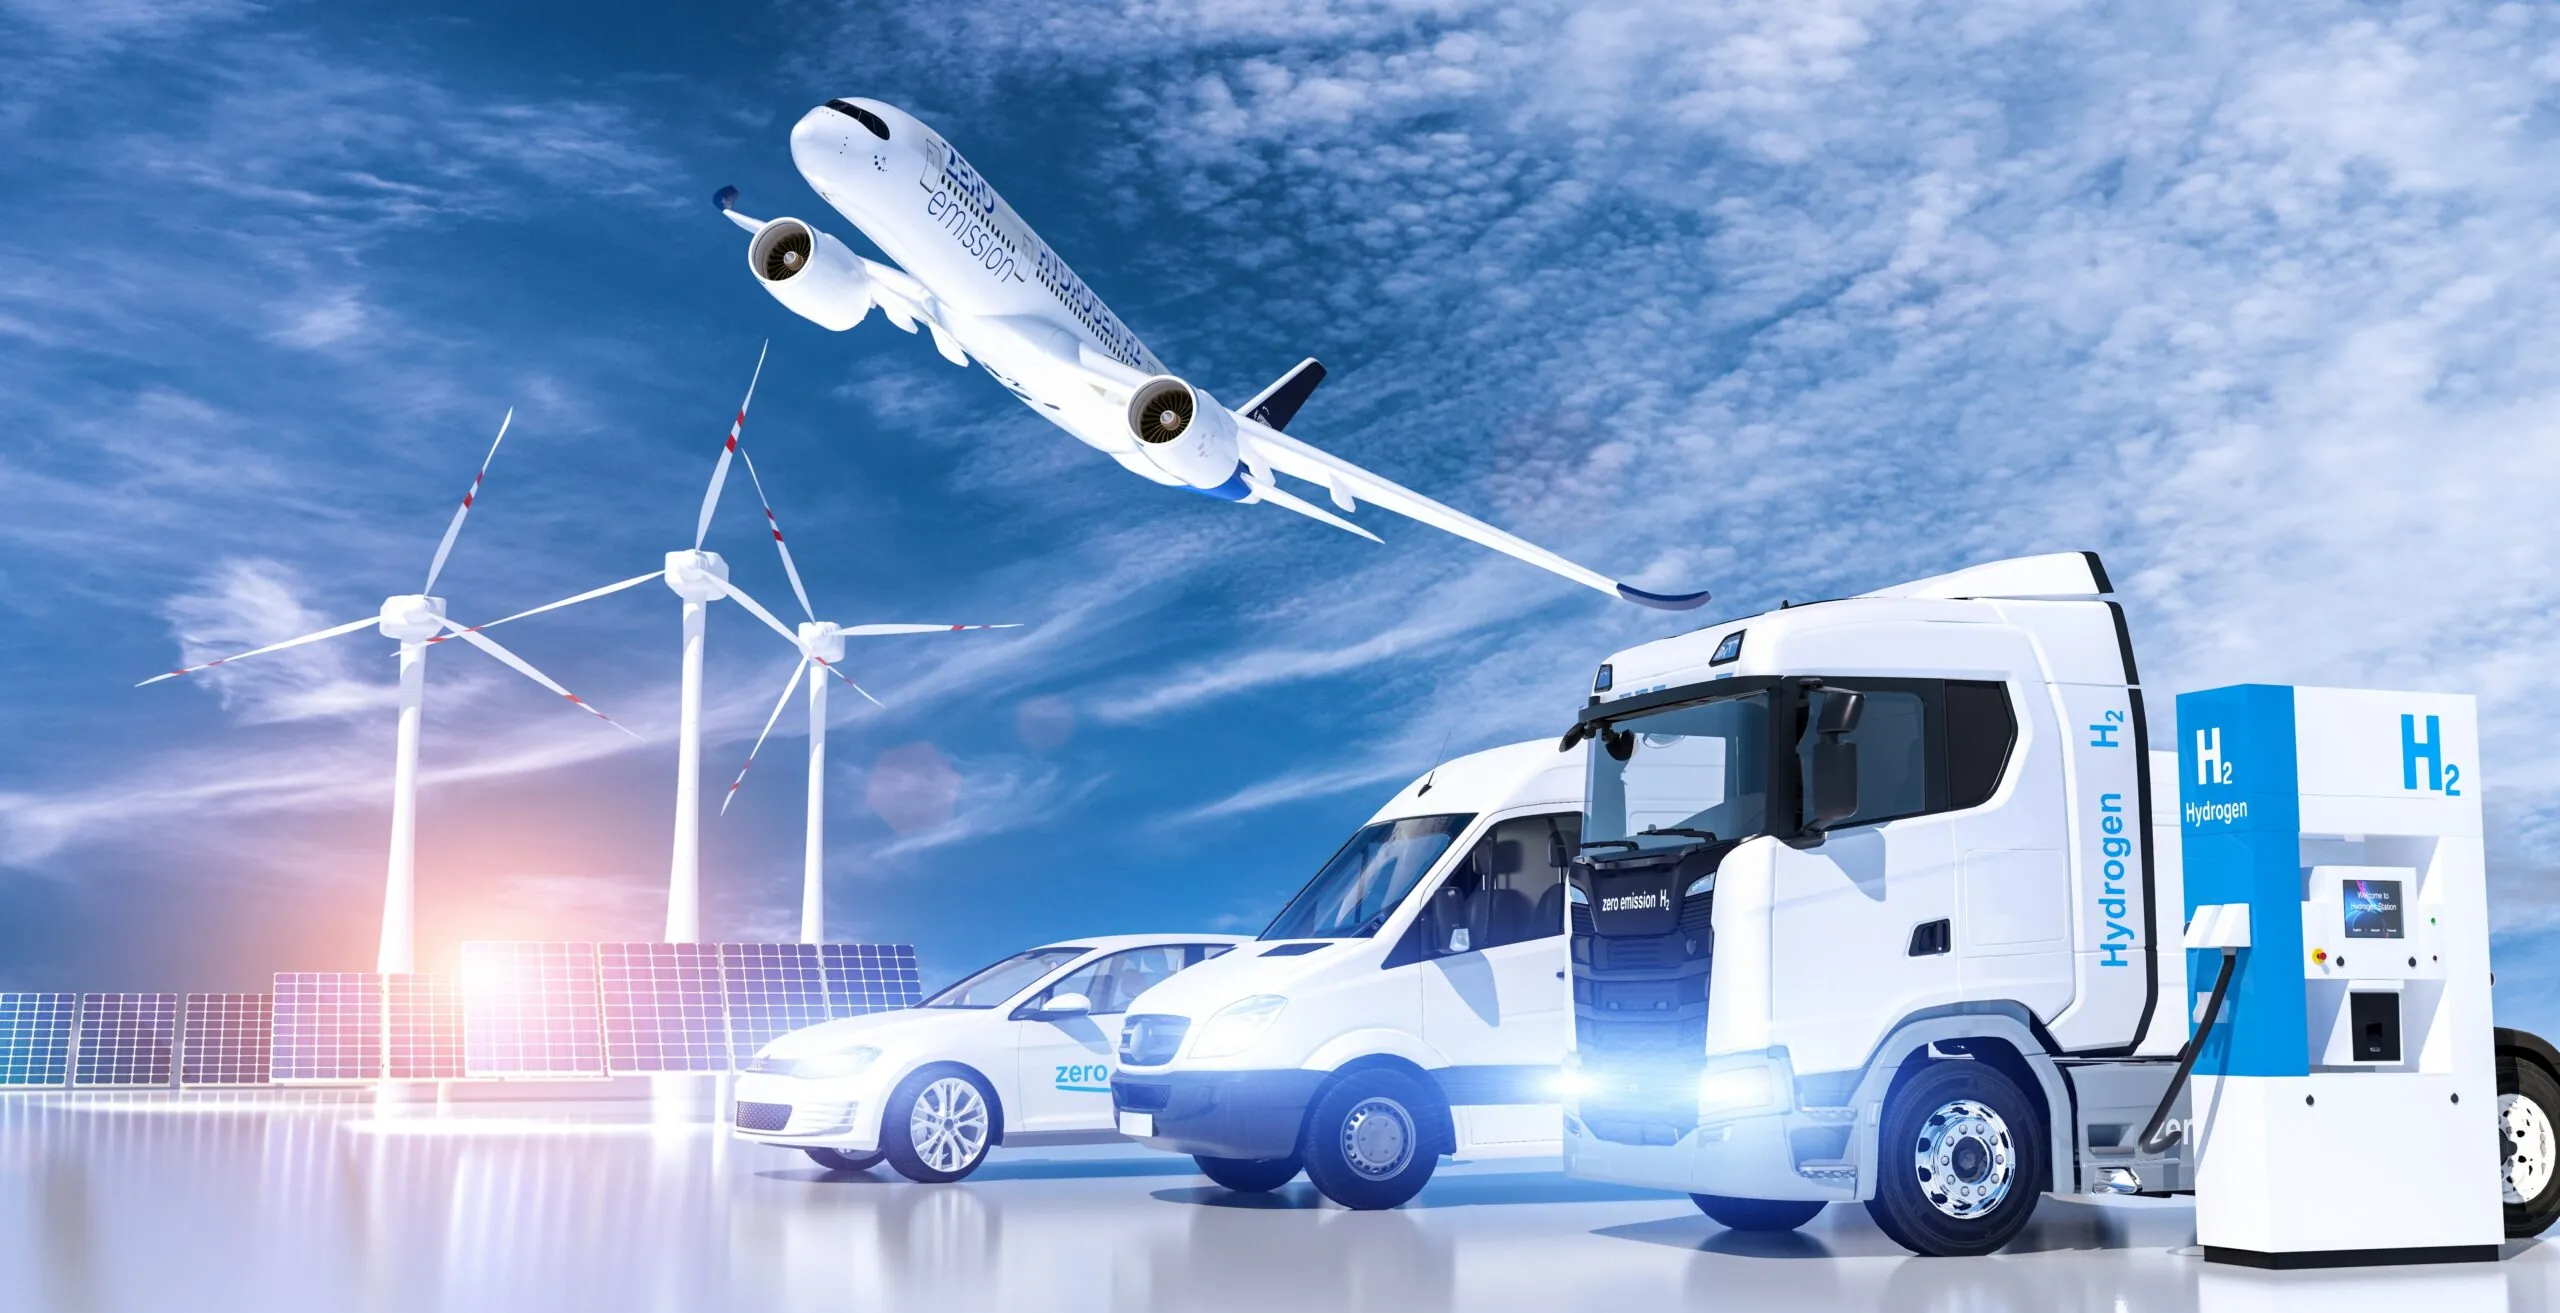 Plane, Transport Van, and Freight Truck refueling at Hydrogen Fuel station with windmills and solar panels in the backdrop